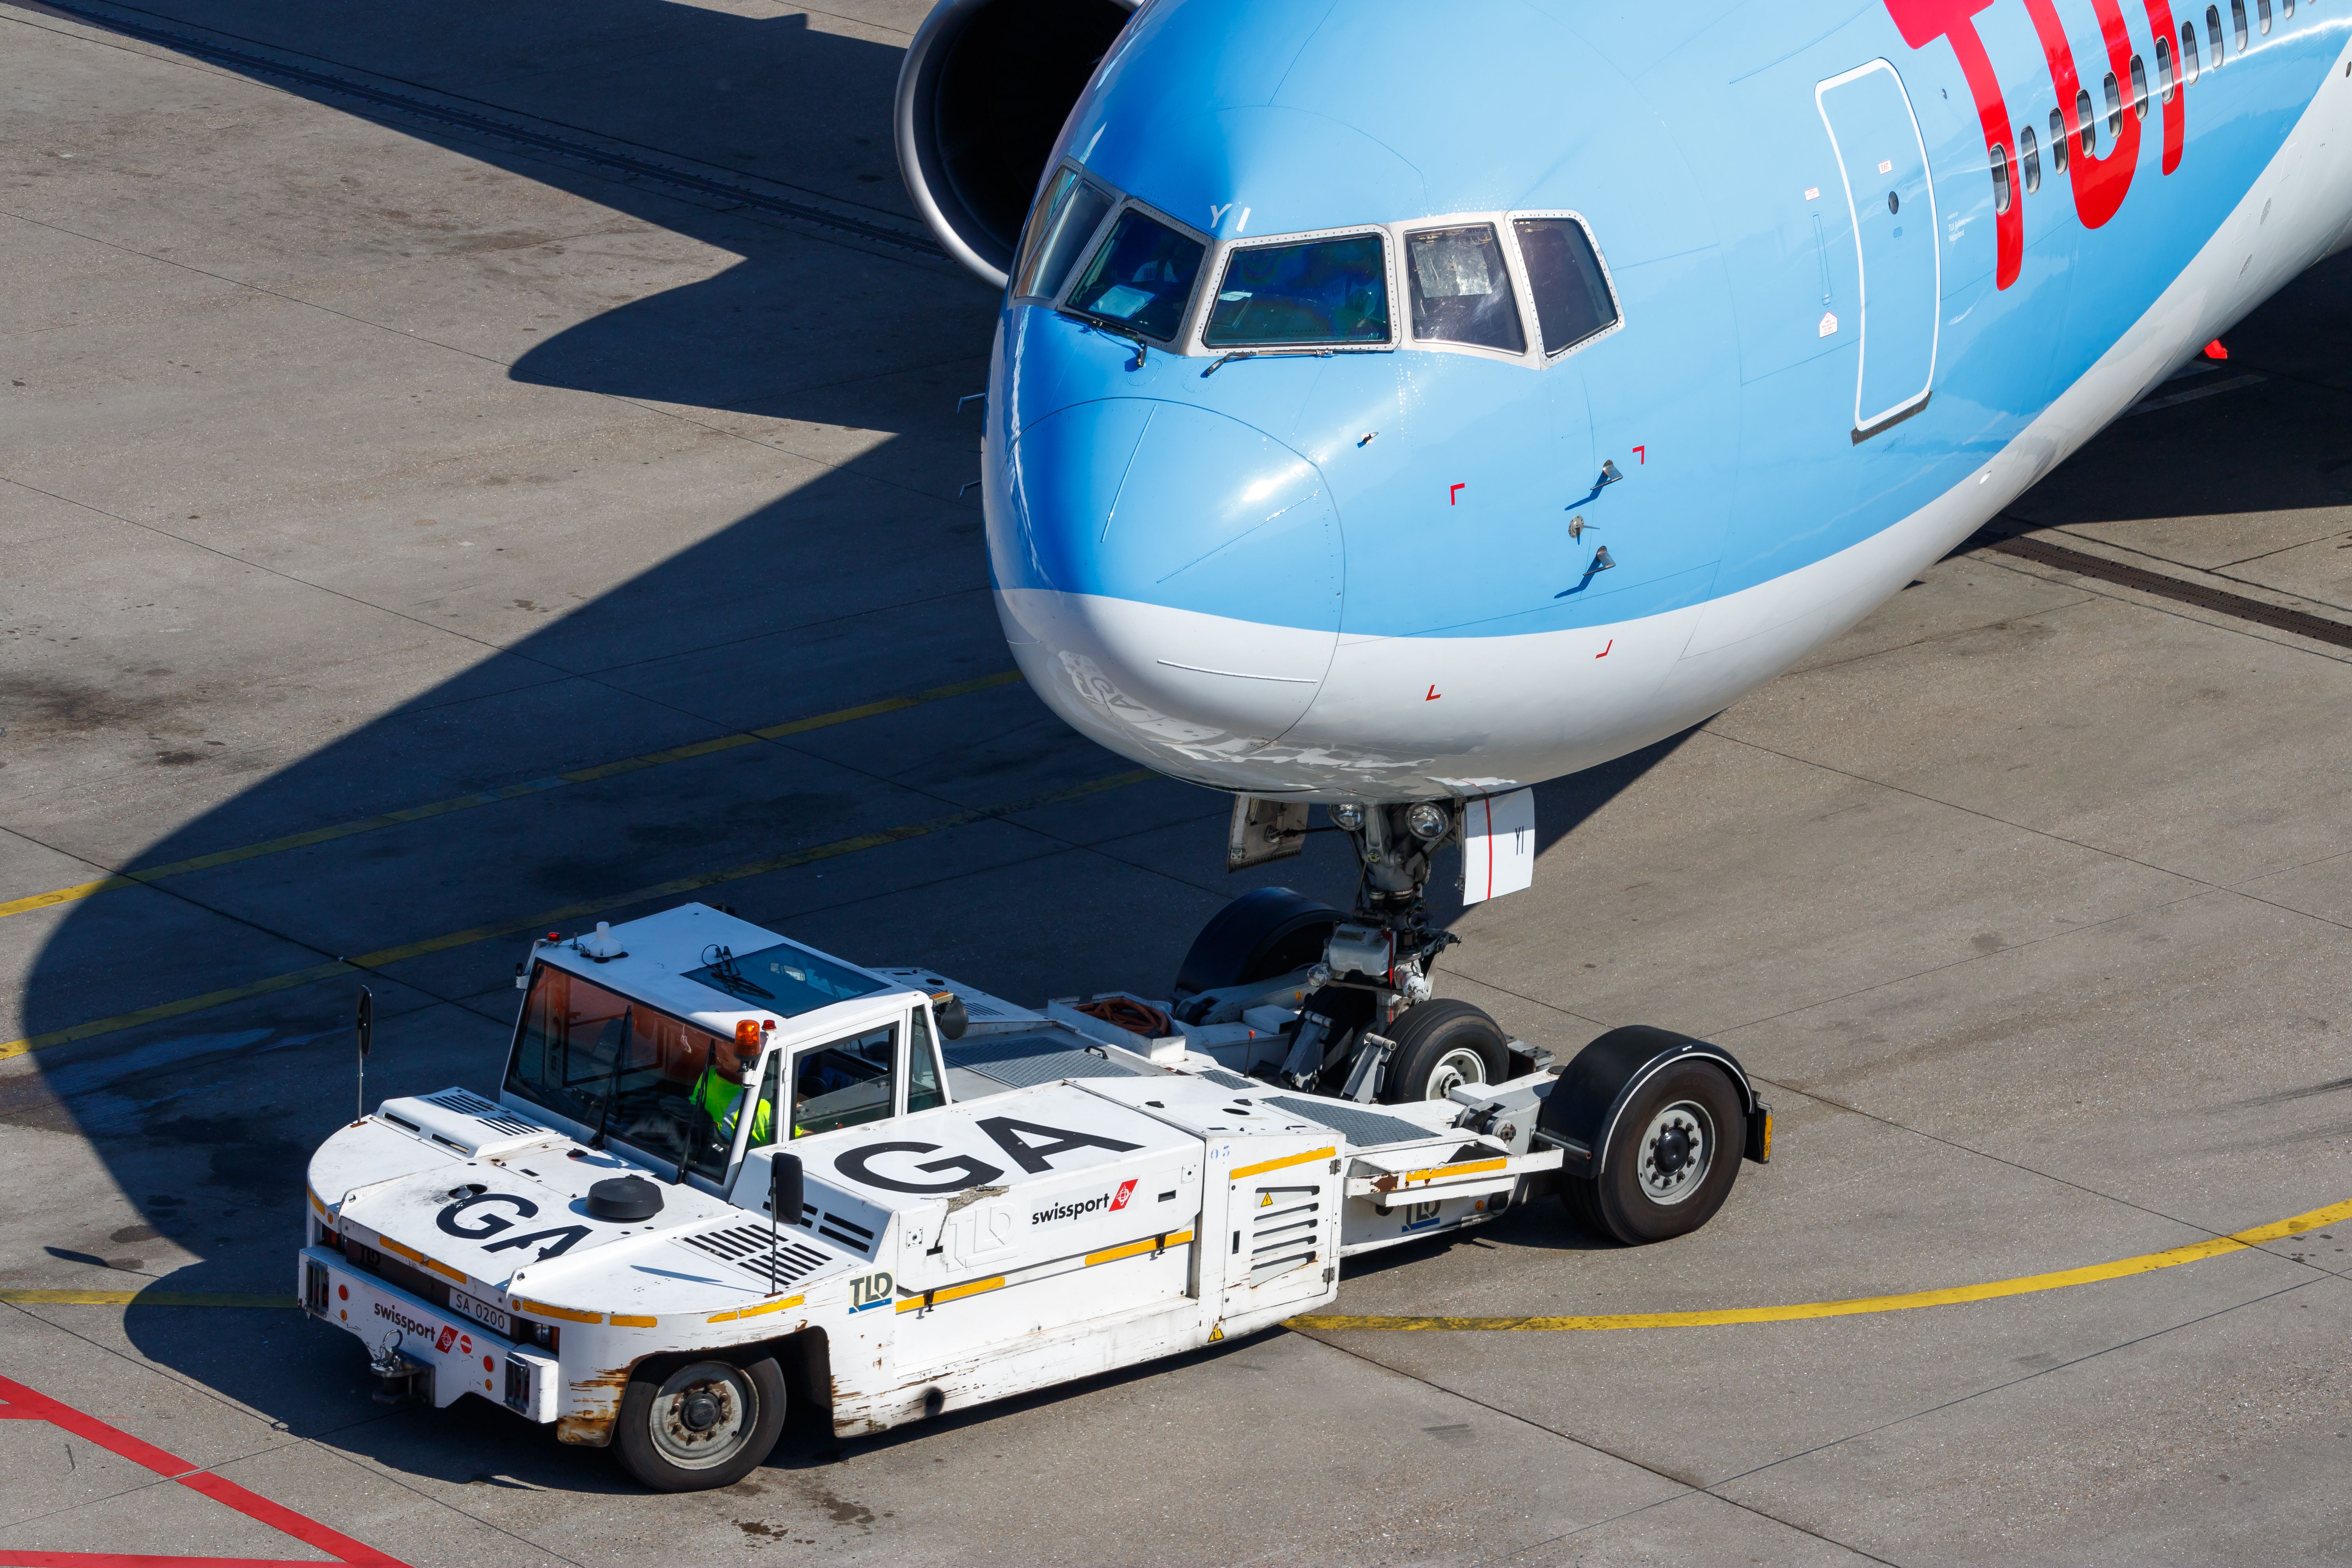 A Tui aircraft being pushed back.